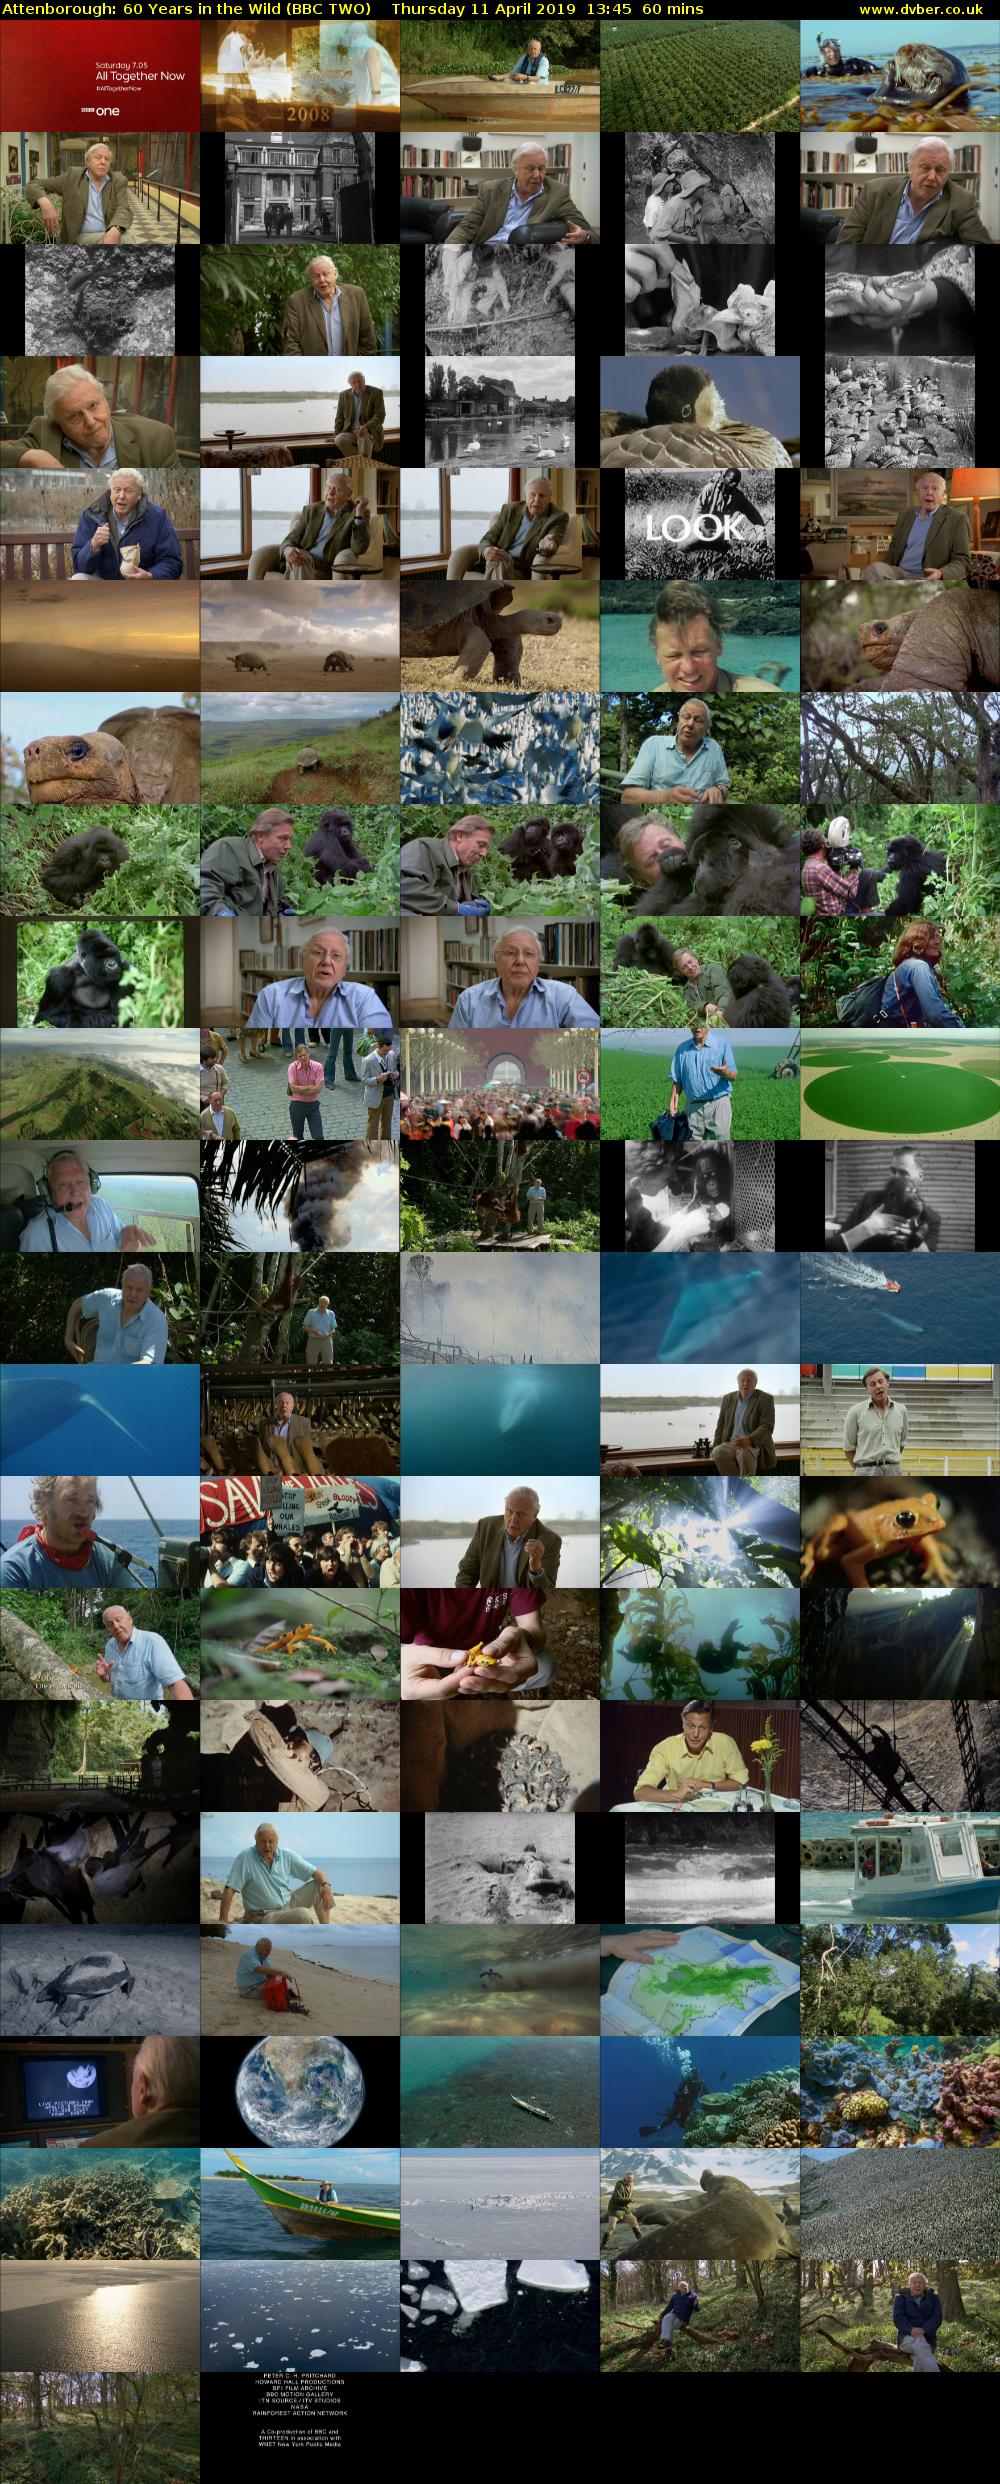 Attenborough: 60 Years in the Wild (BBC TWO) Thursday 11 April 2019 13:45 - 14:45